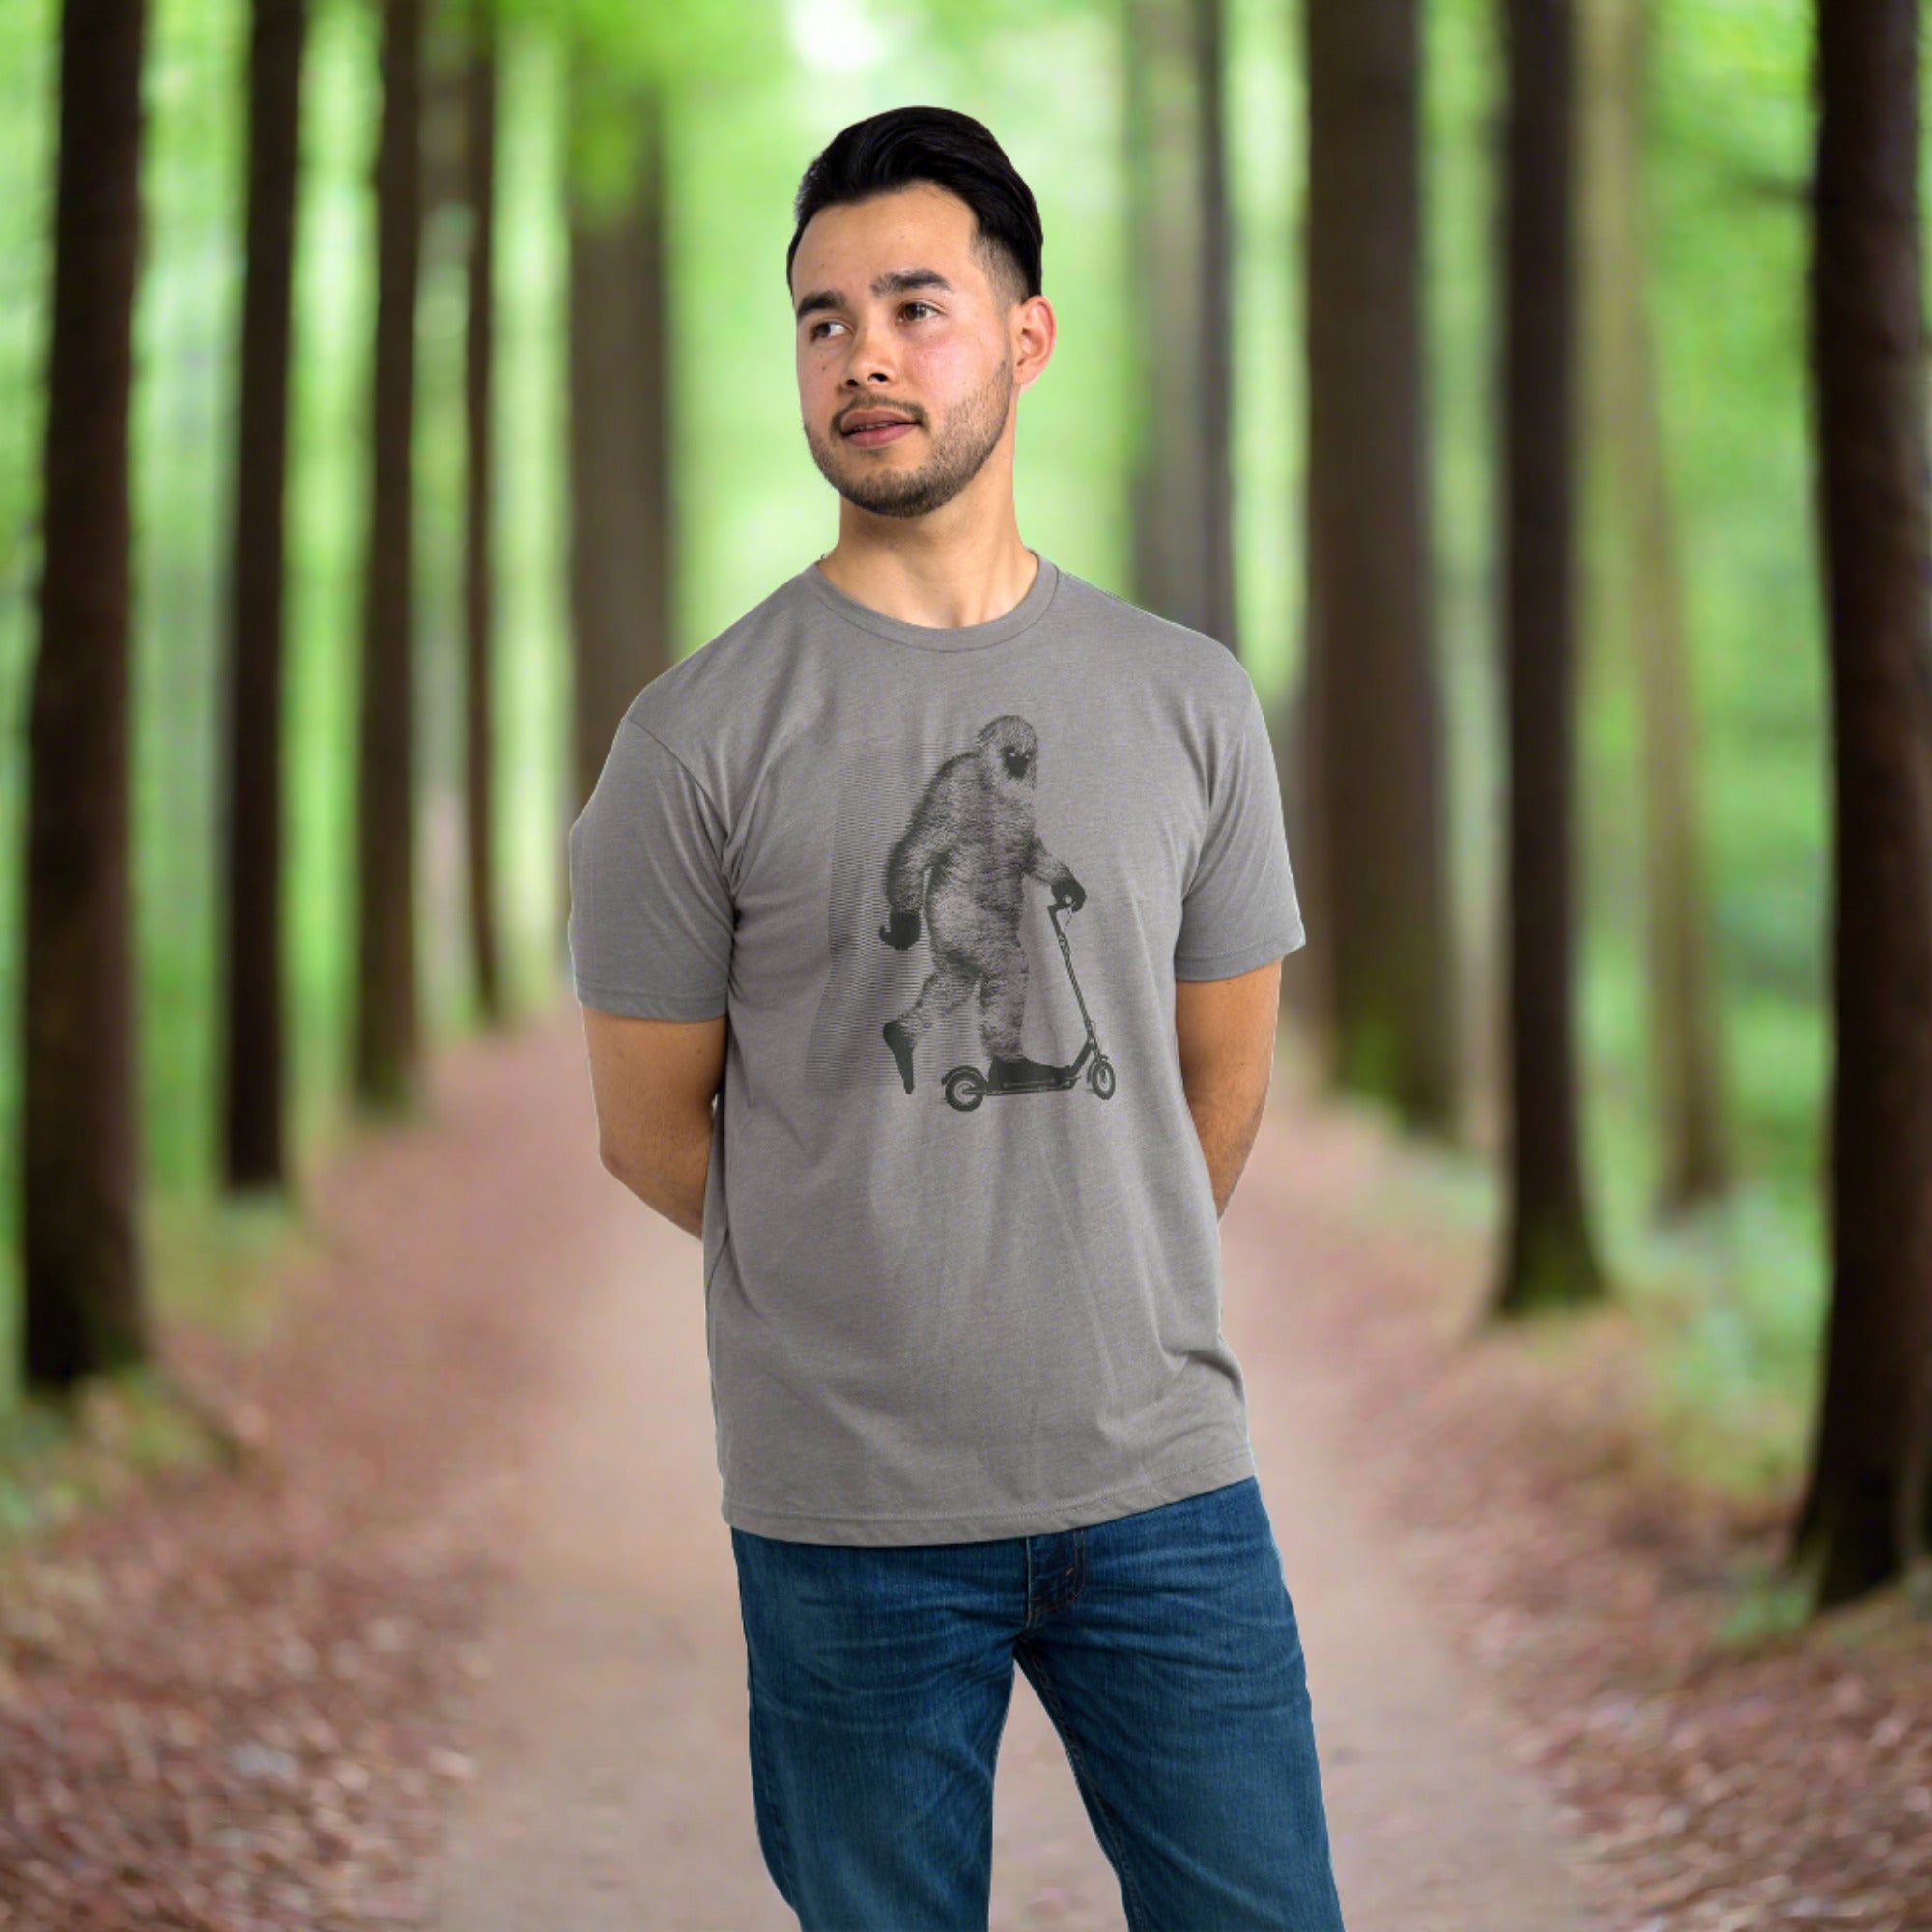 Sasquatch graphic t-shirt by Story Spark